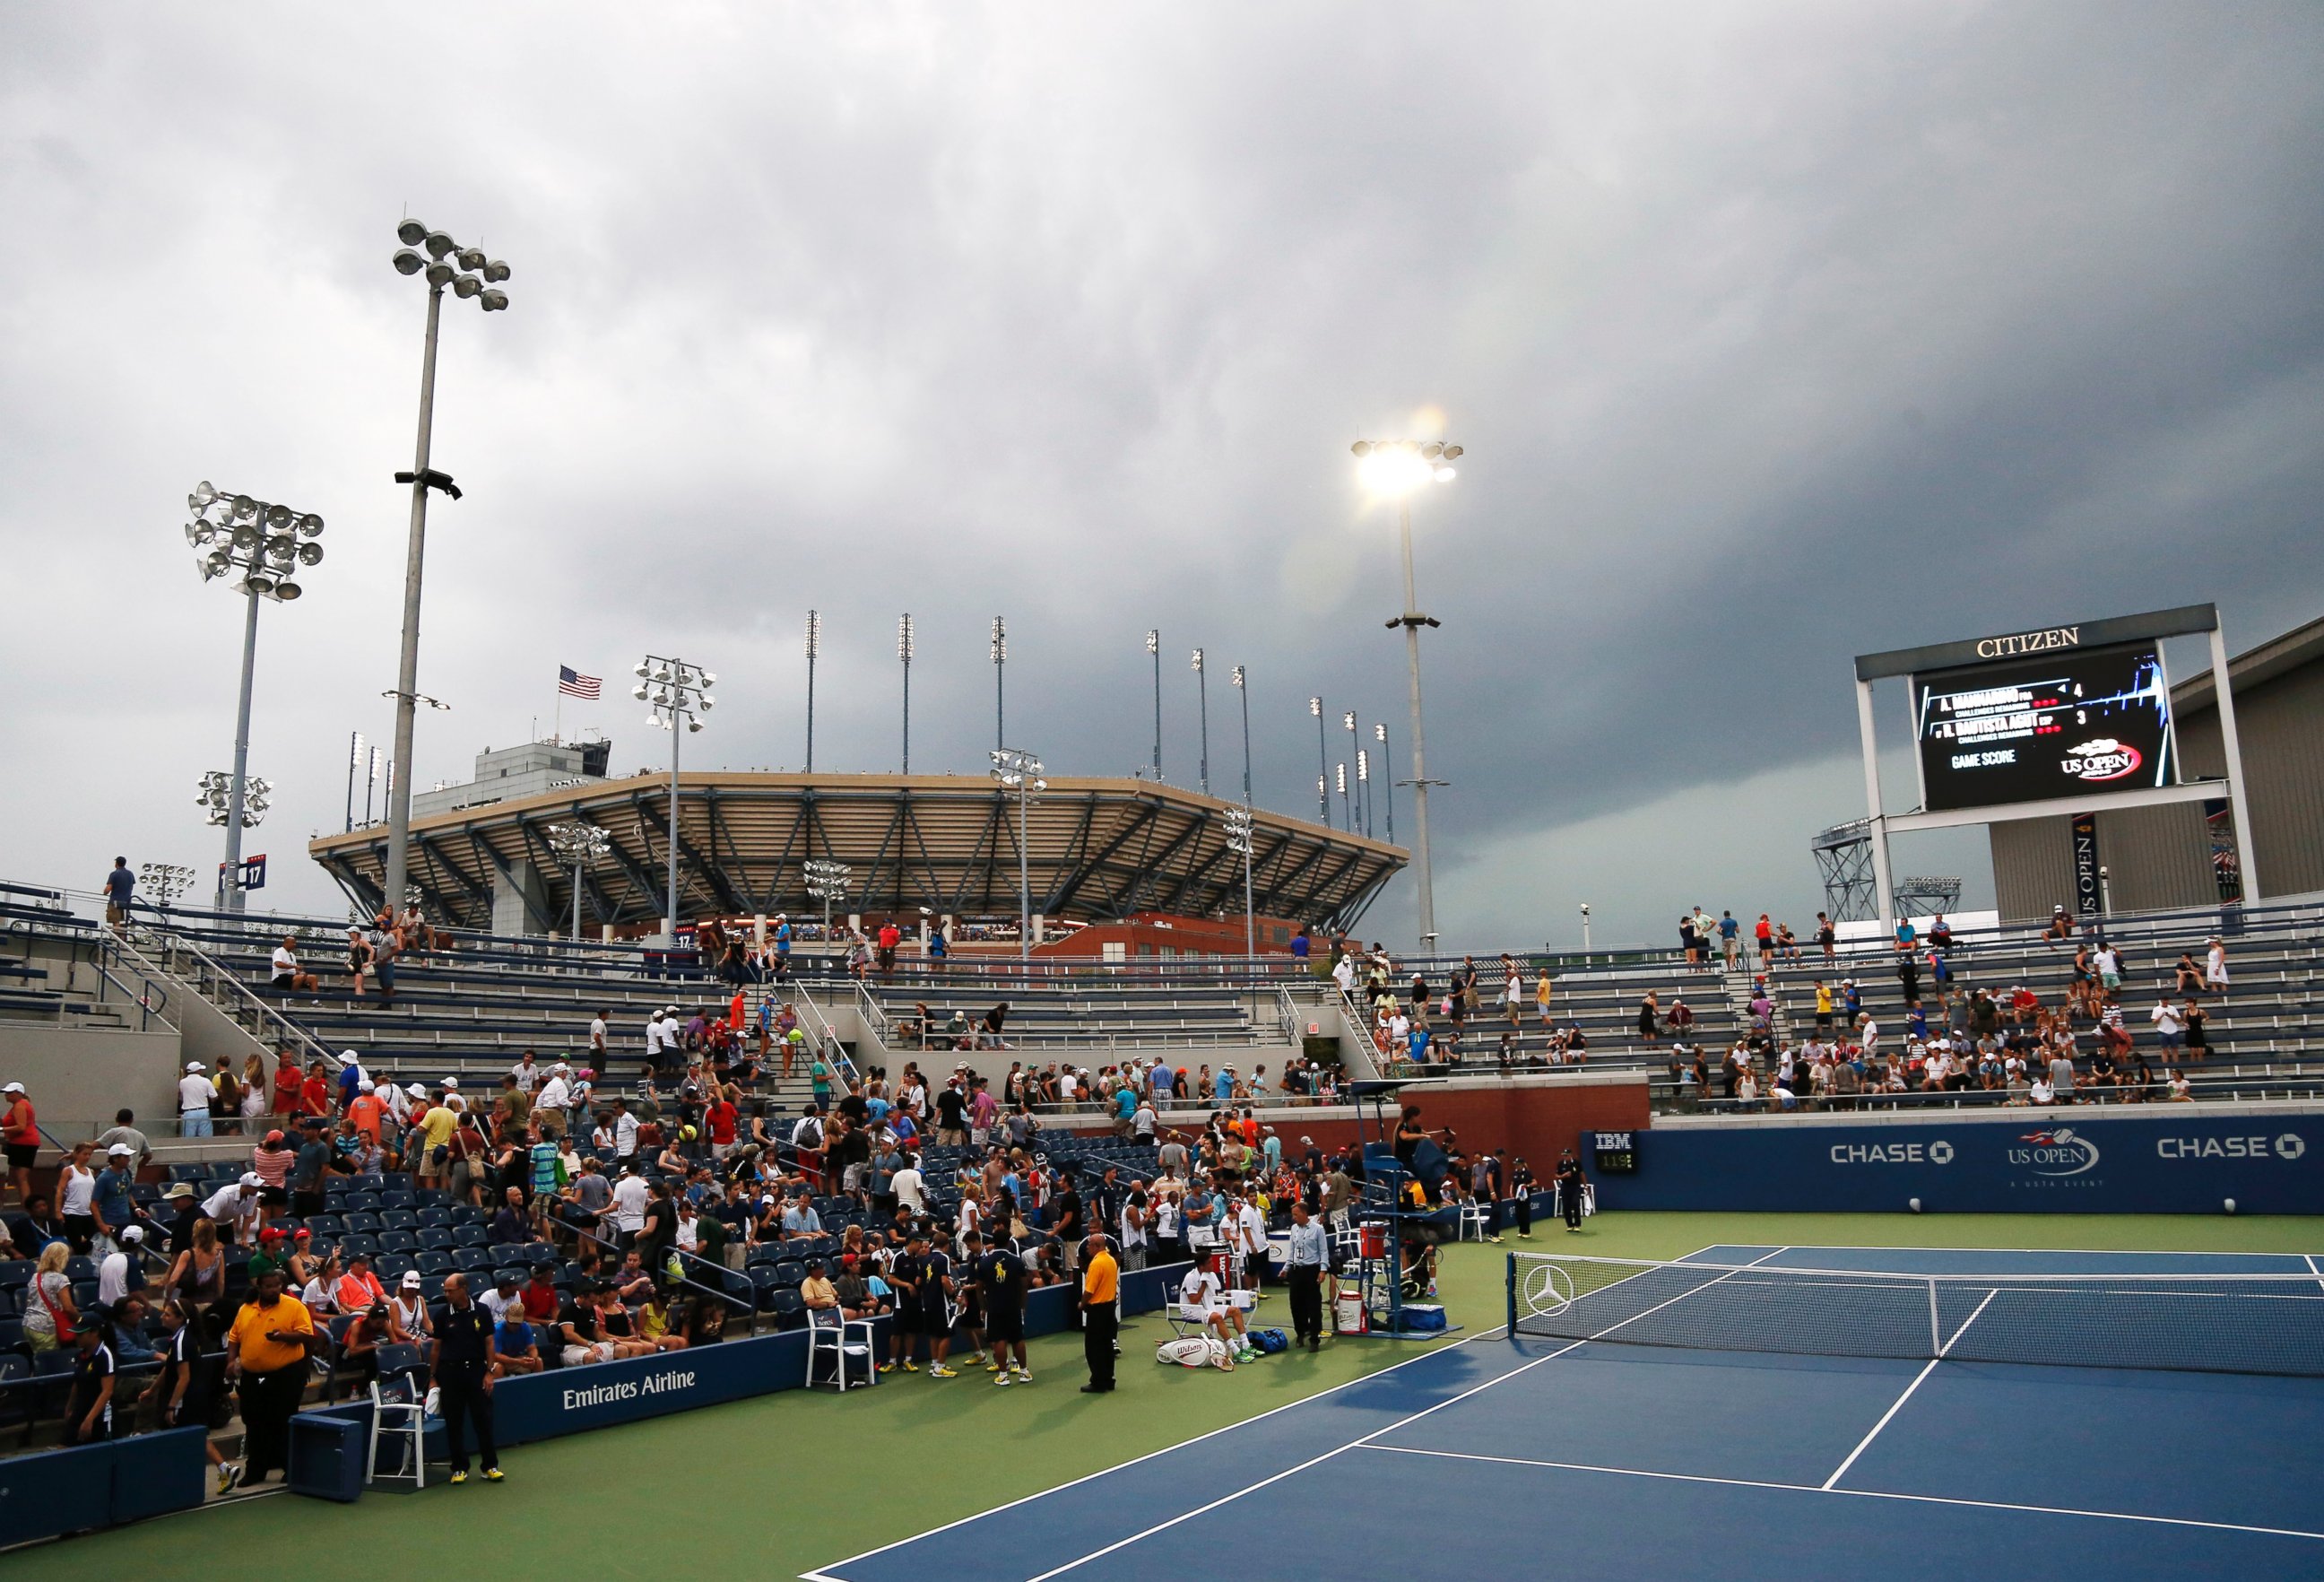 Play is suspended as storm clouds roll over the Billie Jean King National Tennis Center because of imminent lighting during the 2014 U.S. Open tennis tournament, Sunday, Aug. 31, 2014, in New York.